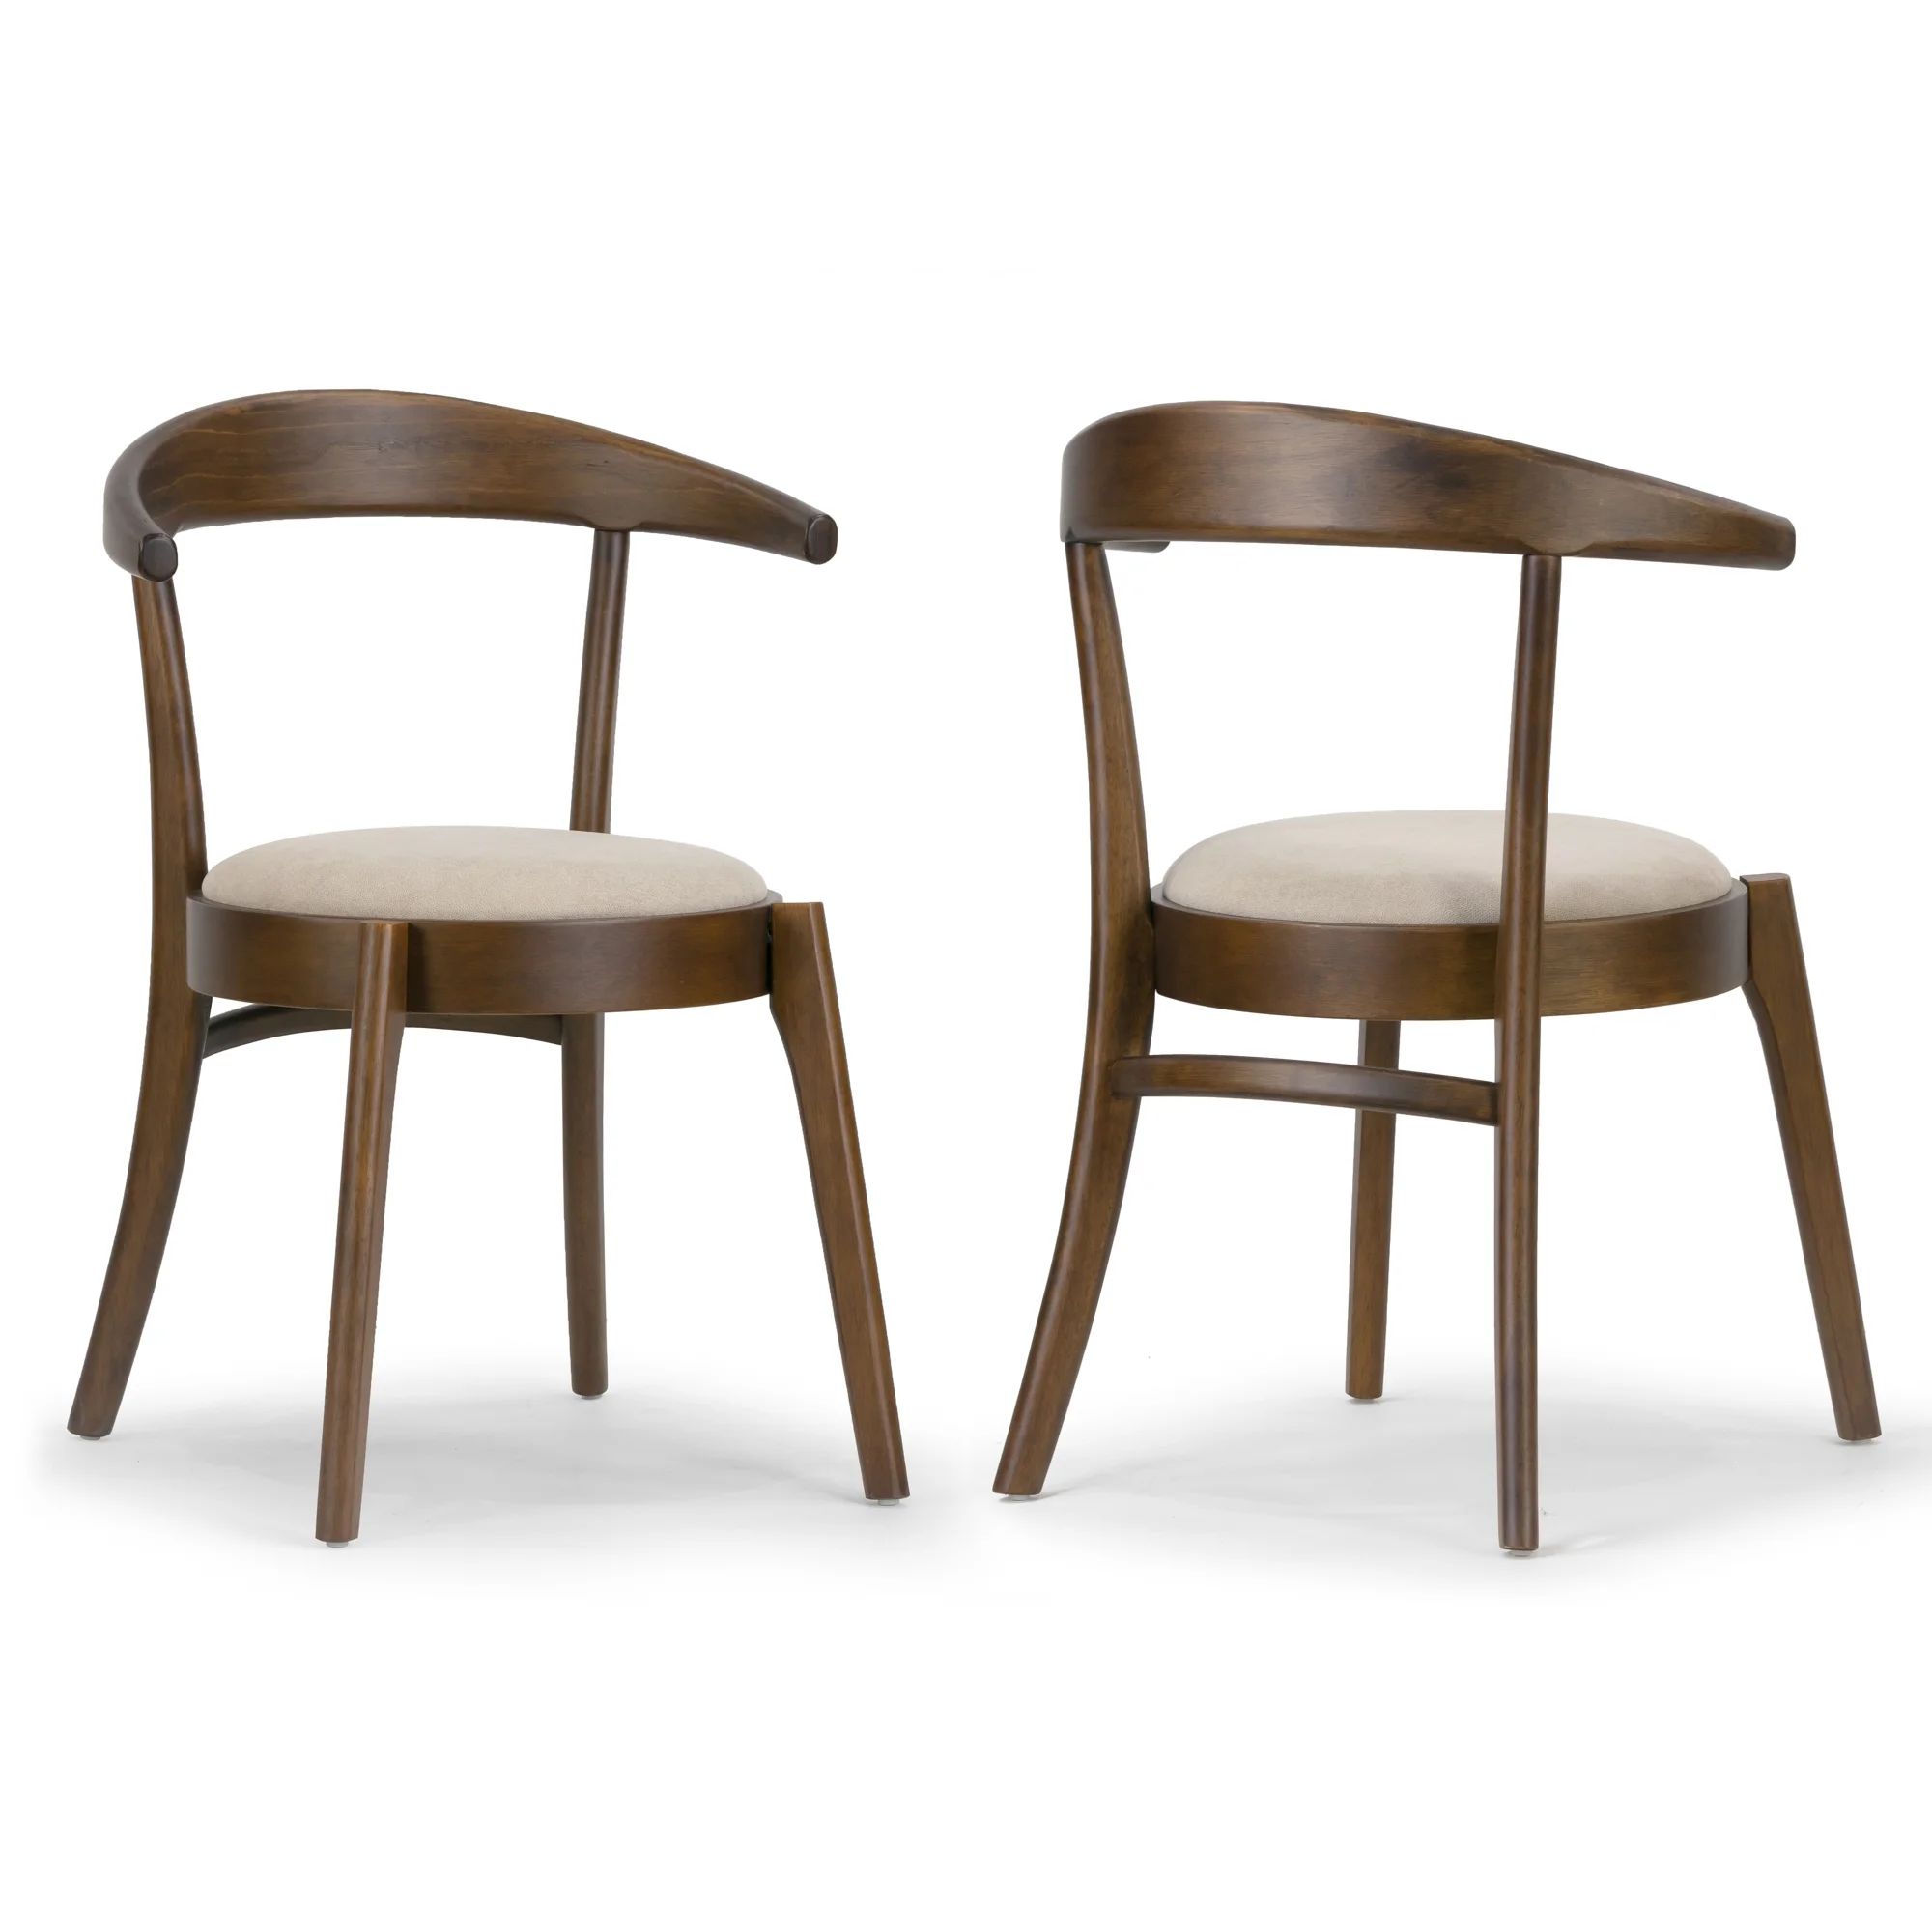 Set of 2 Audra Retro Modern Dark Brown Wood Round Chair with Curved Back | Walmart (US)